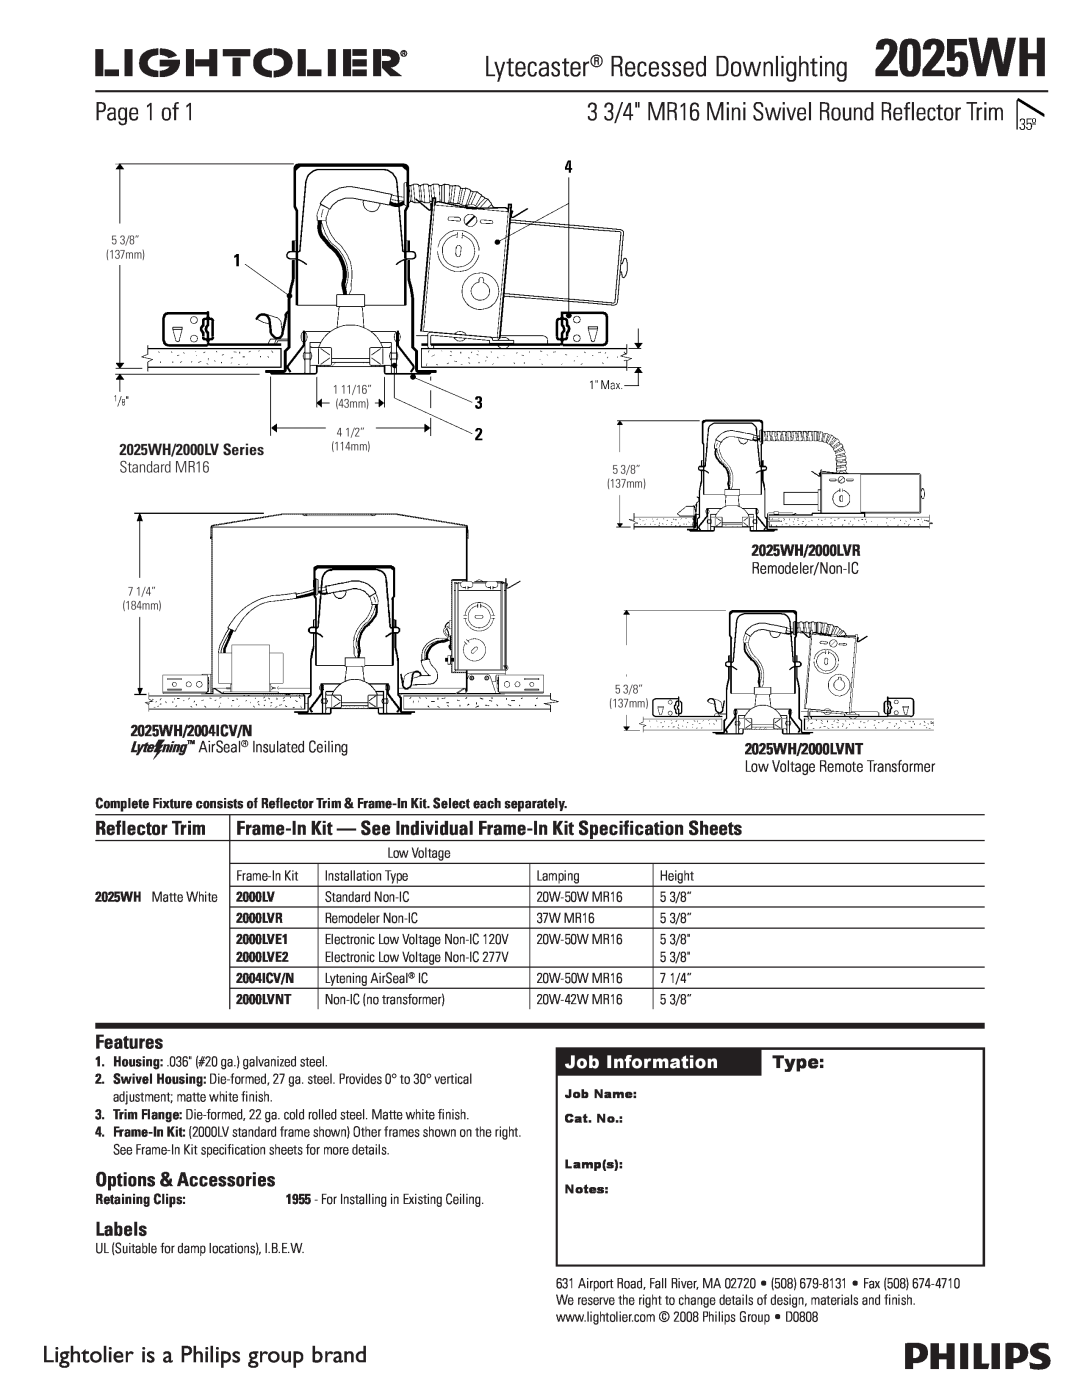 Lightolier specifications Page 1 of, Lightolier is a Philips group brand, Lytecaster Recessed Downlighting2025WH, Type 